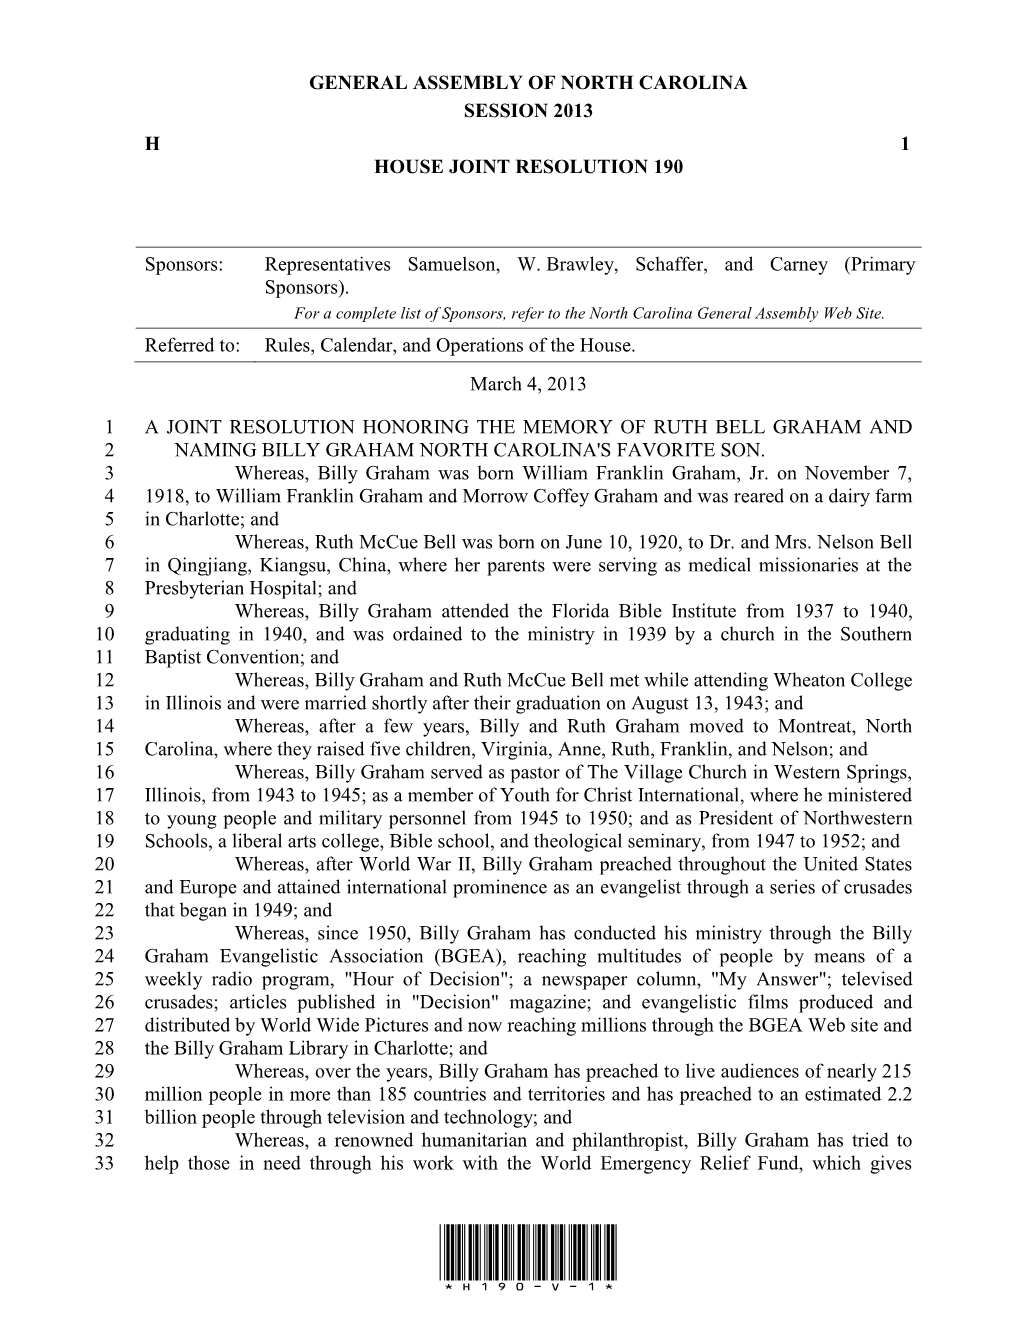 General Assembly of North Carolina Session 2013 H 1 House Joint Resolution 190